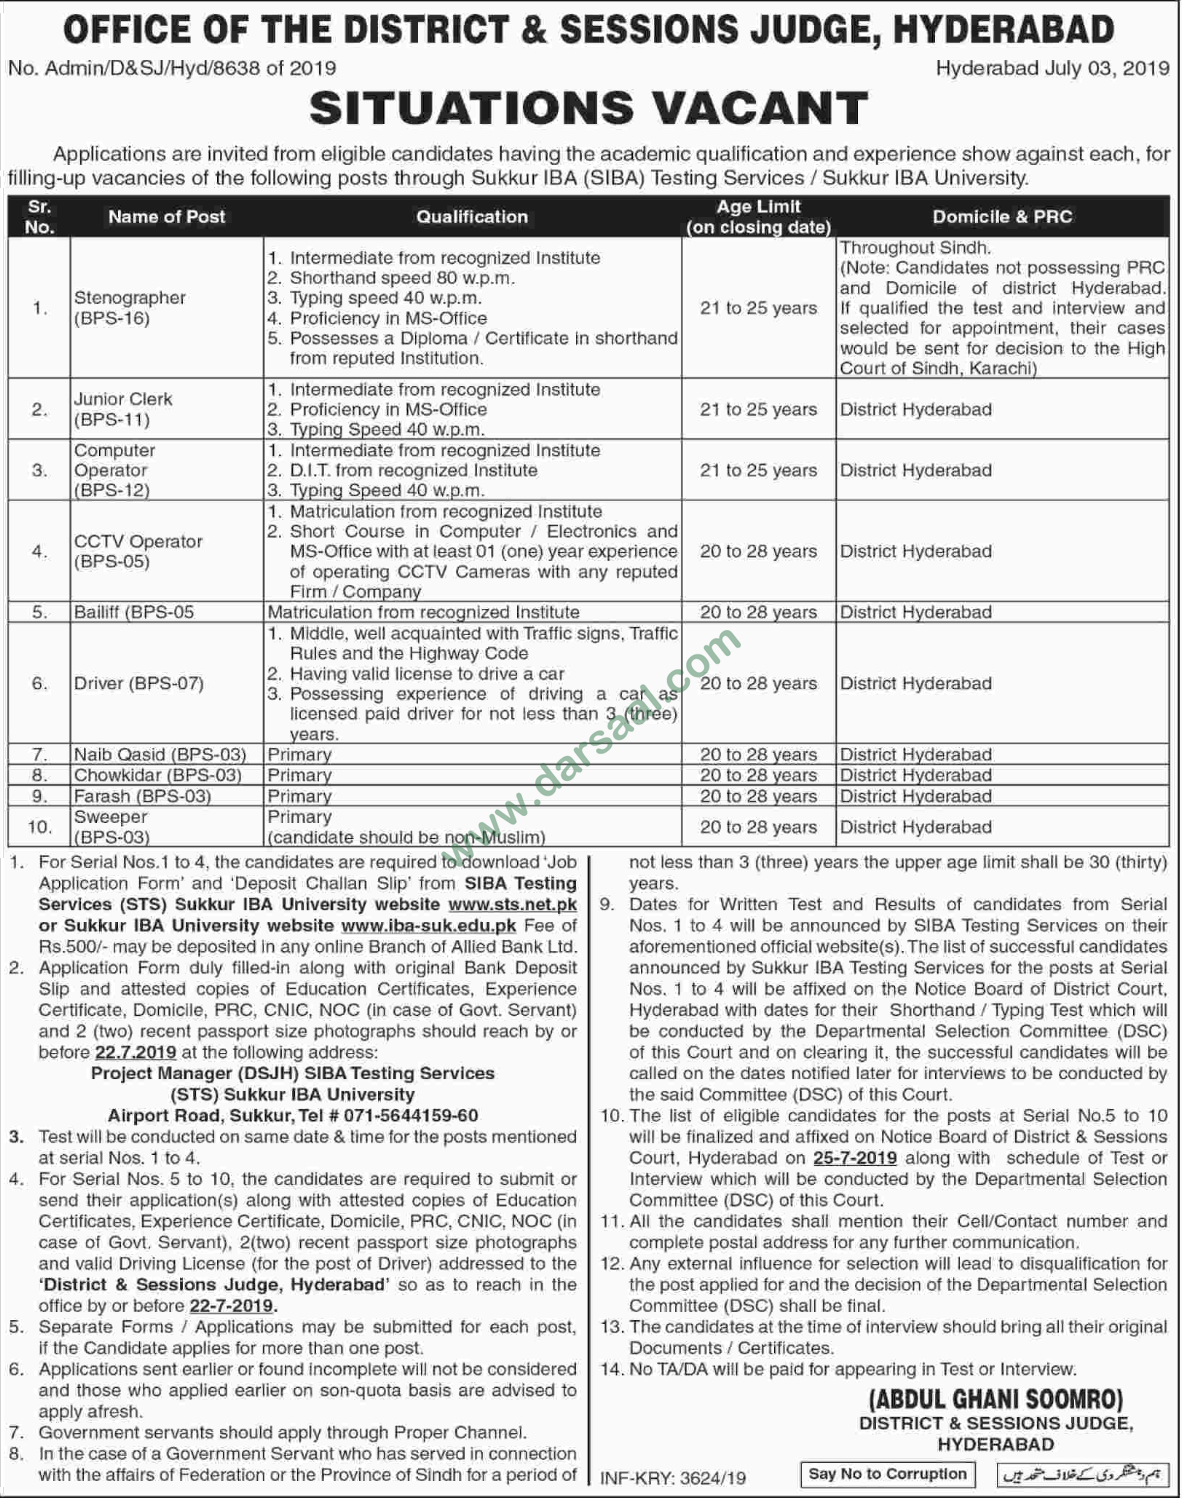 Bailiff Jobs in District & Sessions Judge in Hyderabad - Jul 05, 2019